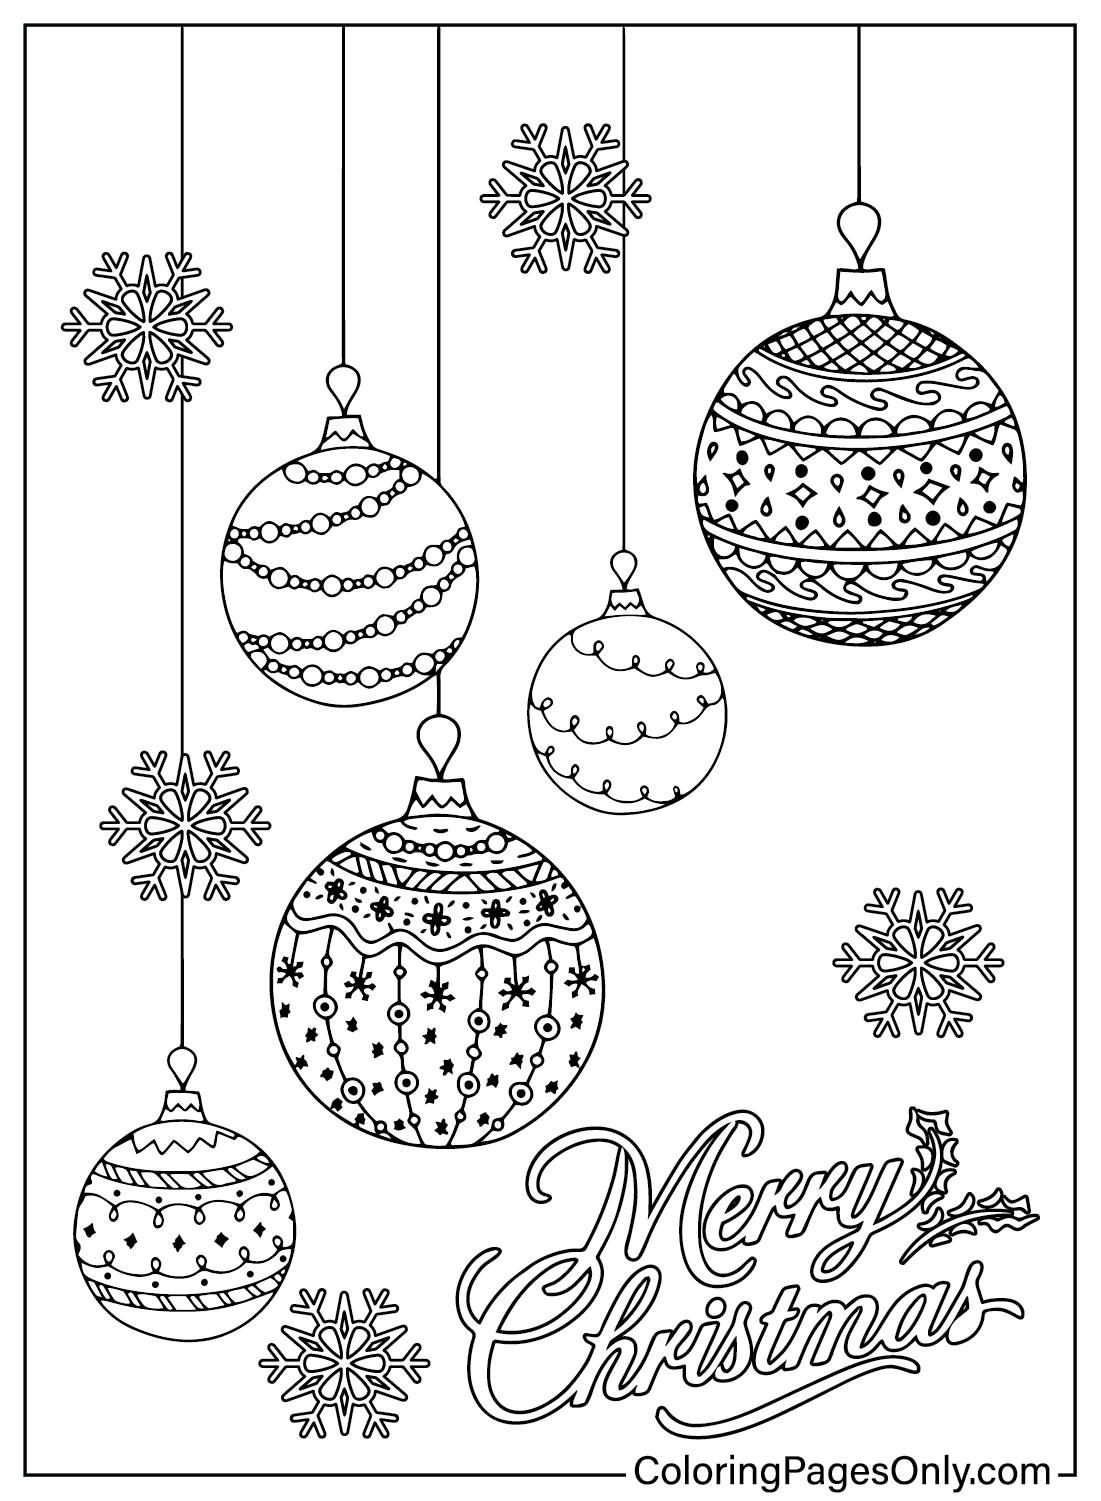 Christmas Ornaments Coloring Pages to for Kids